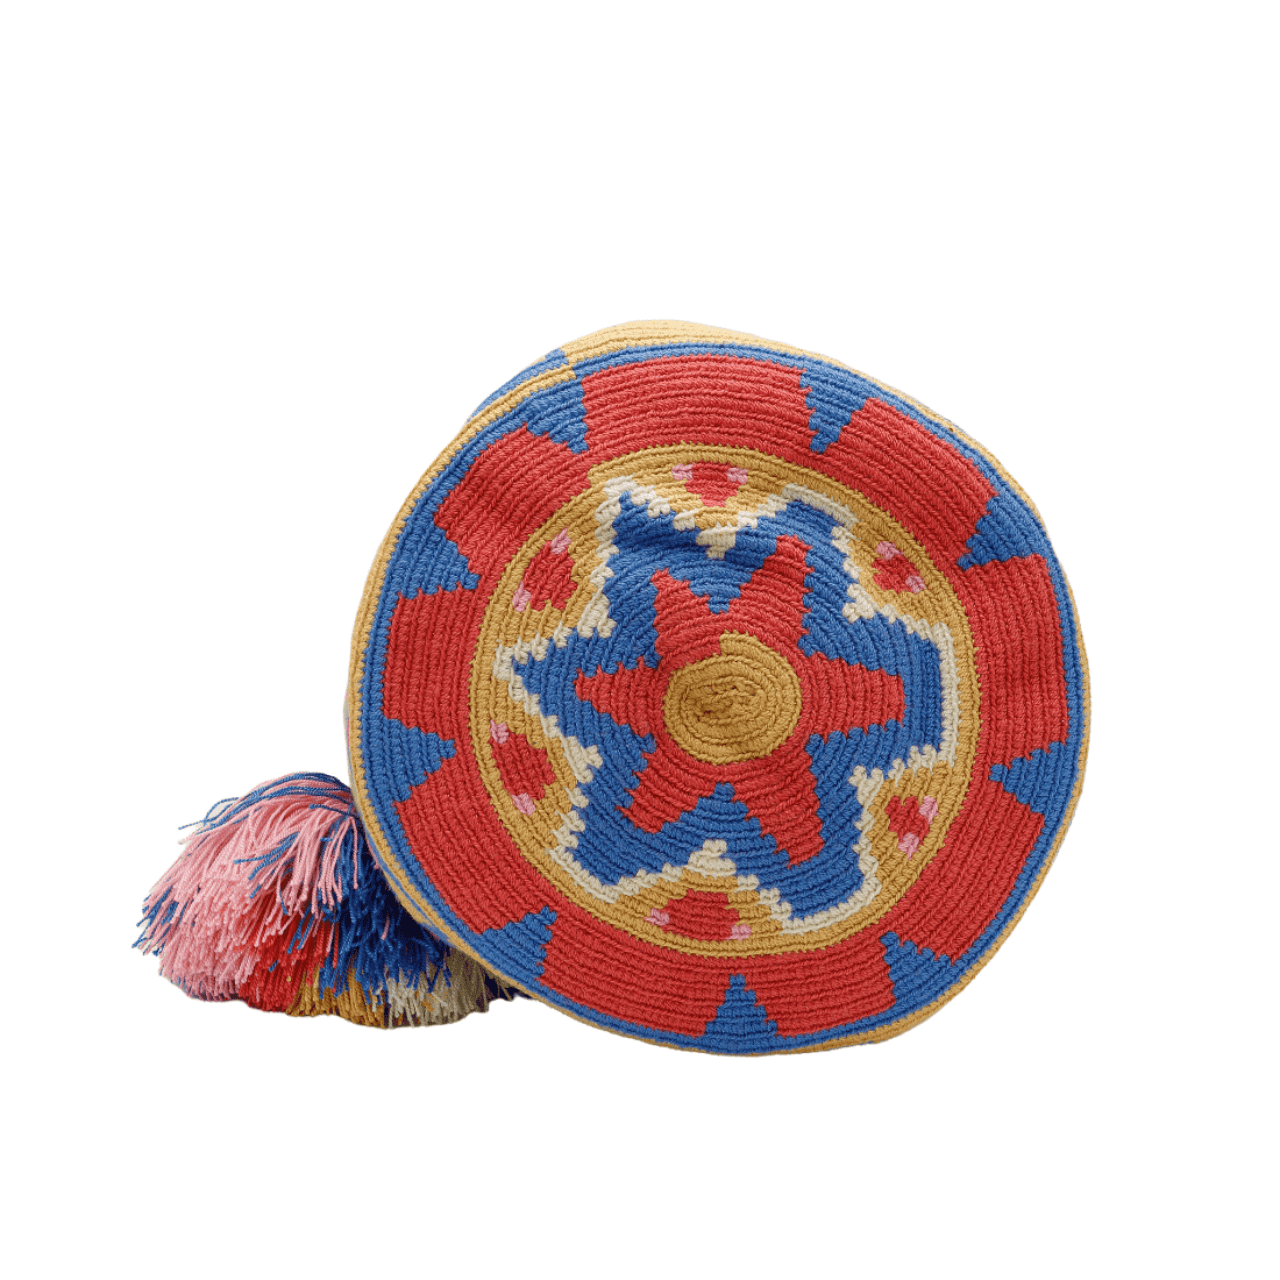 Mari Wayuu Bag in enchanting dark beige hue, featuring mesmerizing pink and blue patterns, handcrafted in Colombia, creating a truly distinct and eye-catching design.